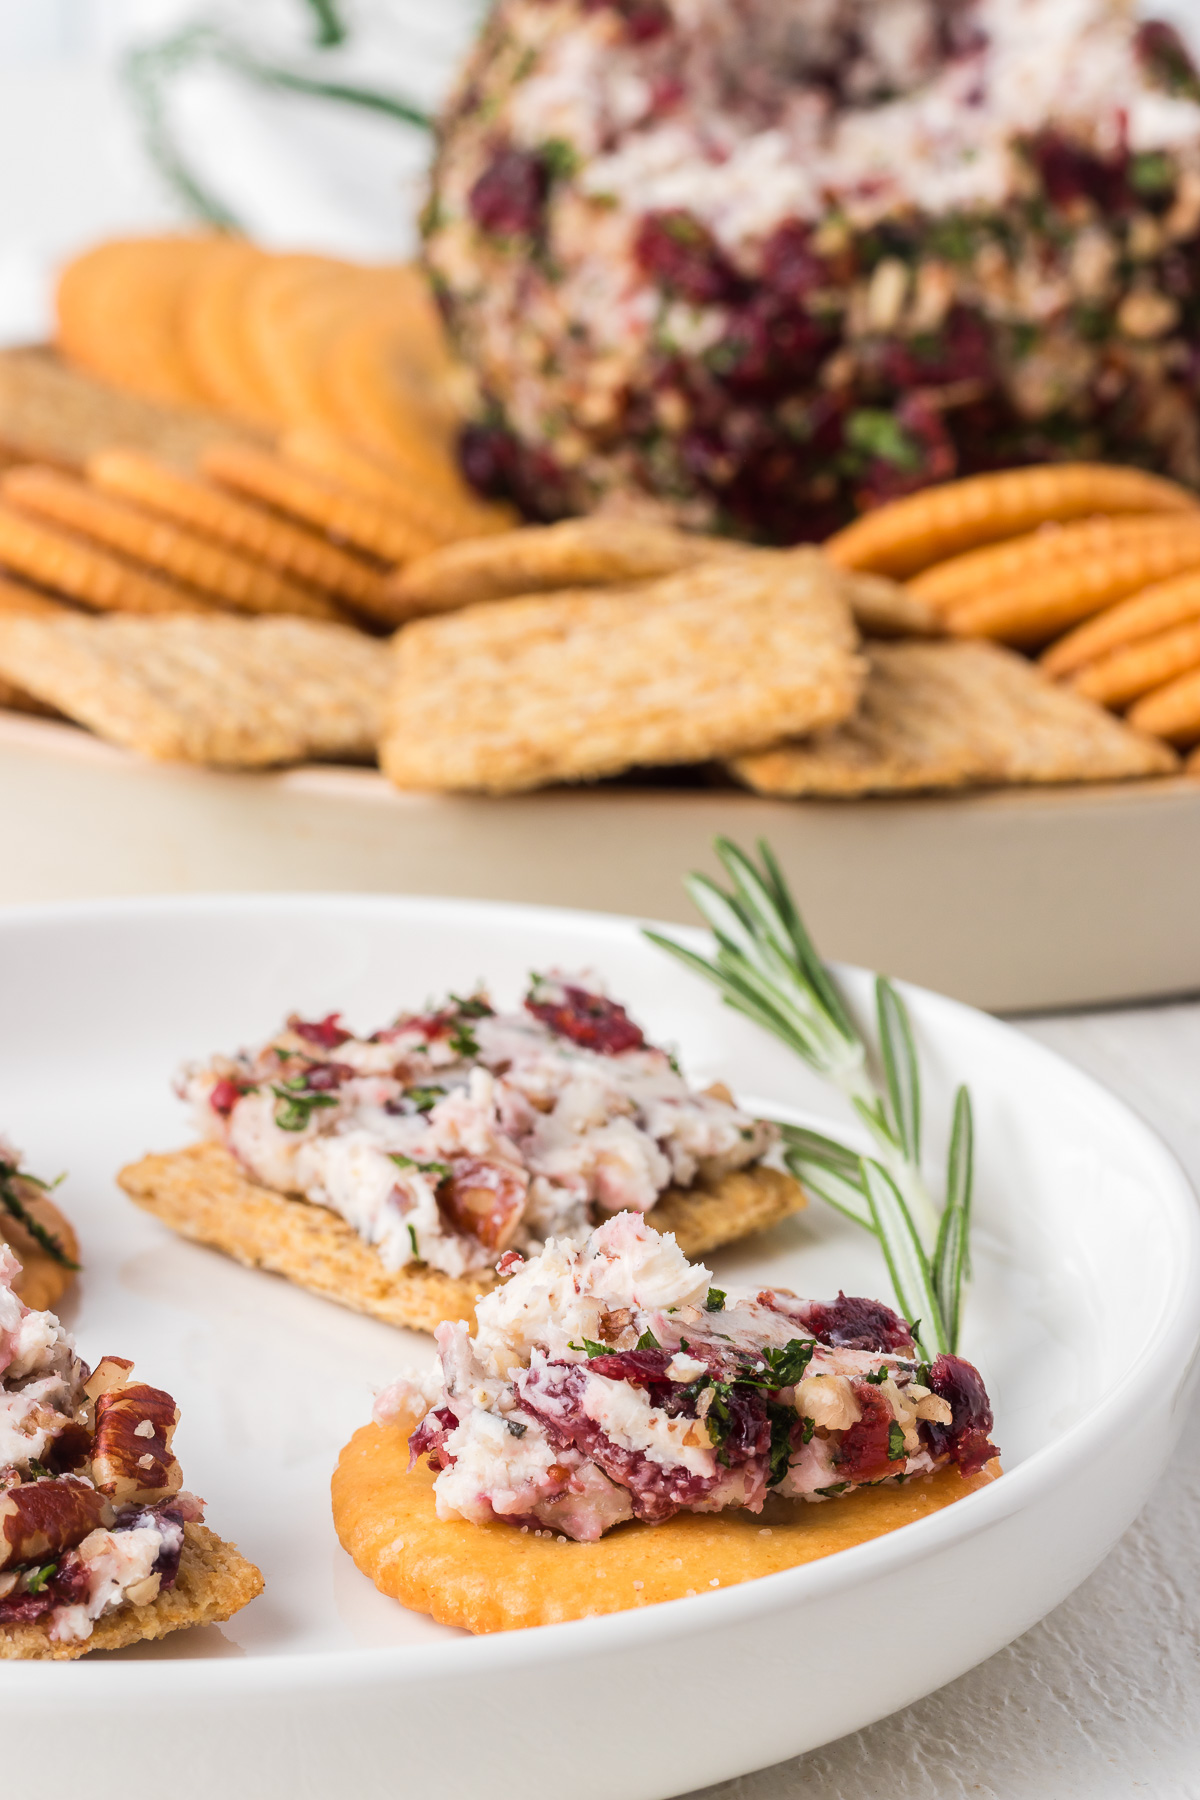 If you’re looking for an easy appetizer to serve when you’re entertaining this holiday season, try this traditional Holiday Cheese Ball! Two types of cheese are mixed with tangy dried cranberries, fragrant chopped rosemary, and pecan pieces, then rolled in even more cranberries, pecans and parsley for a colorful and festive starter. Serve it with your favorite crackers or veggies for a tasty snack your guests will return to again and again! via @foodhussy